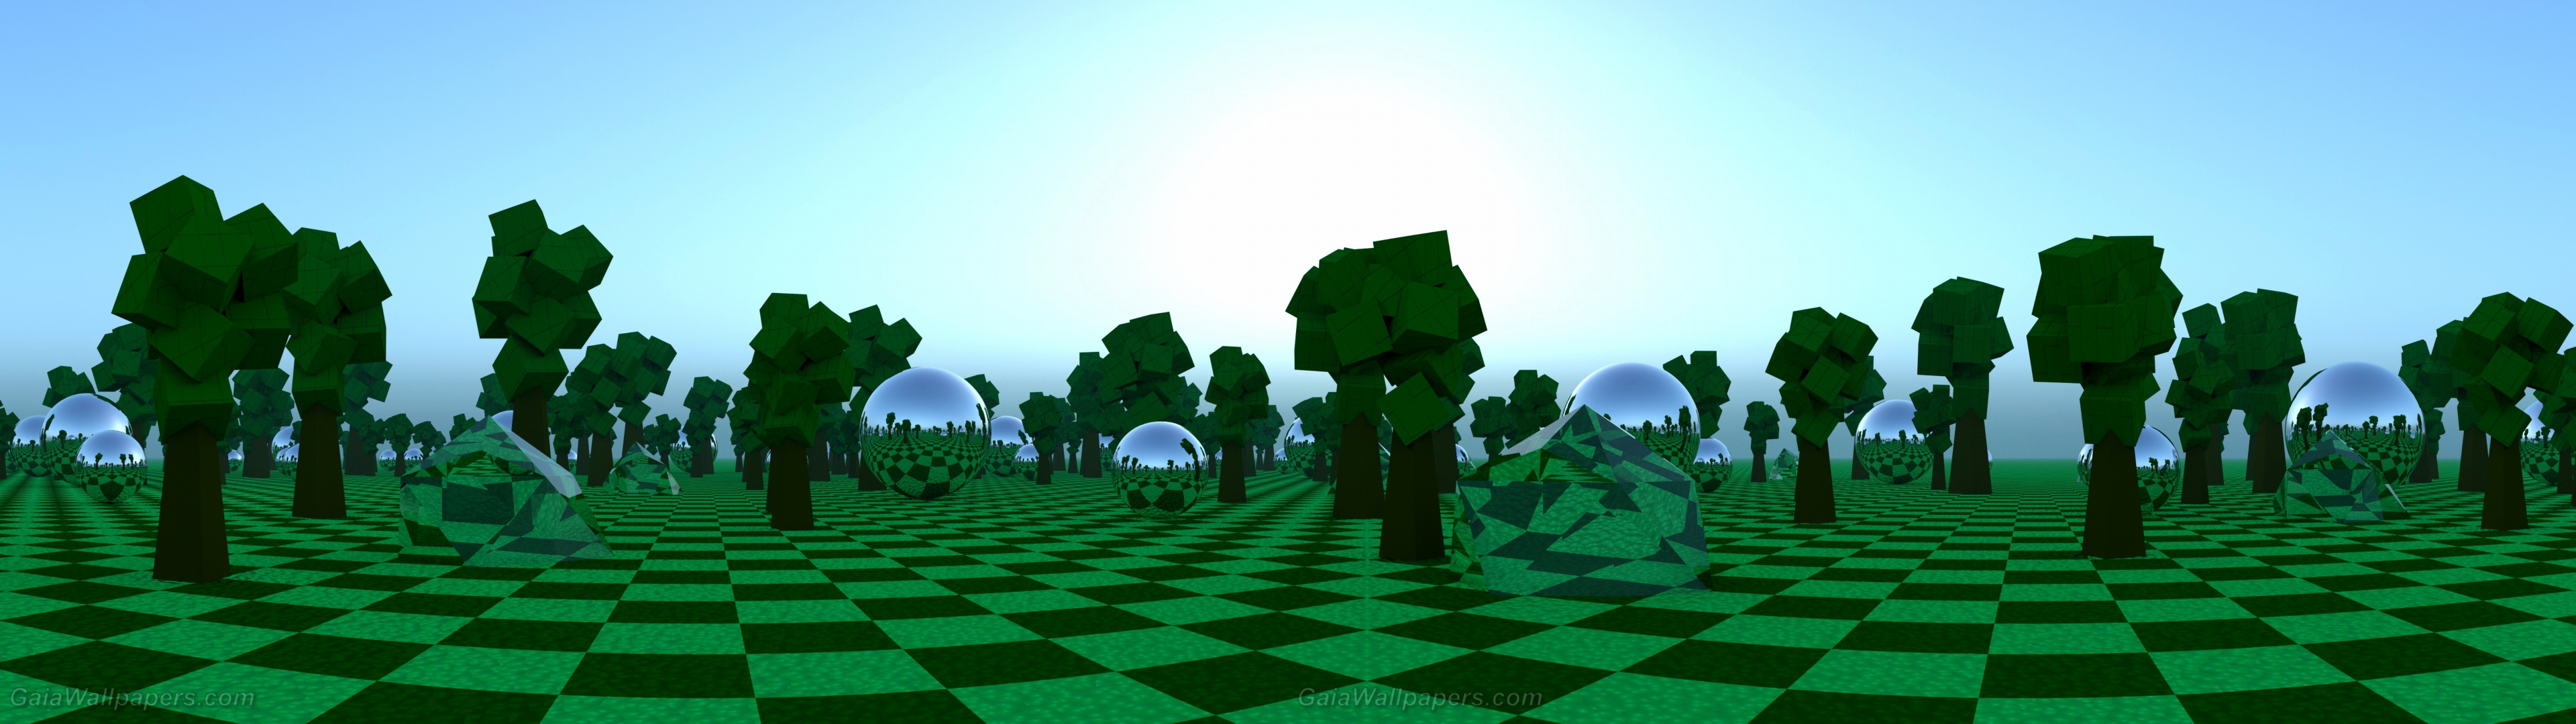 Green Chessboard With Synthetic Forest - Black And White - HD Wallpaper 